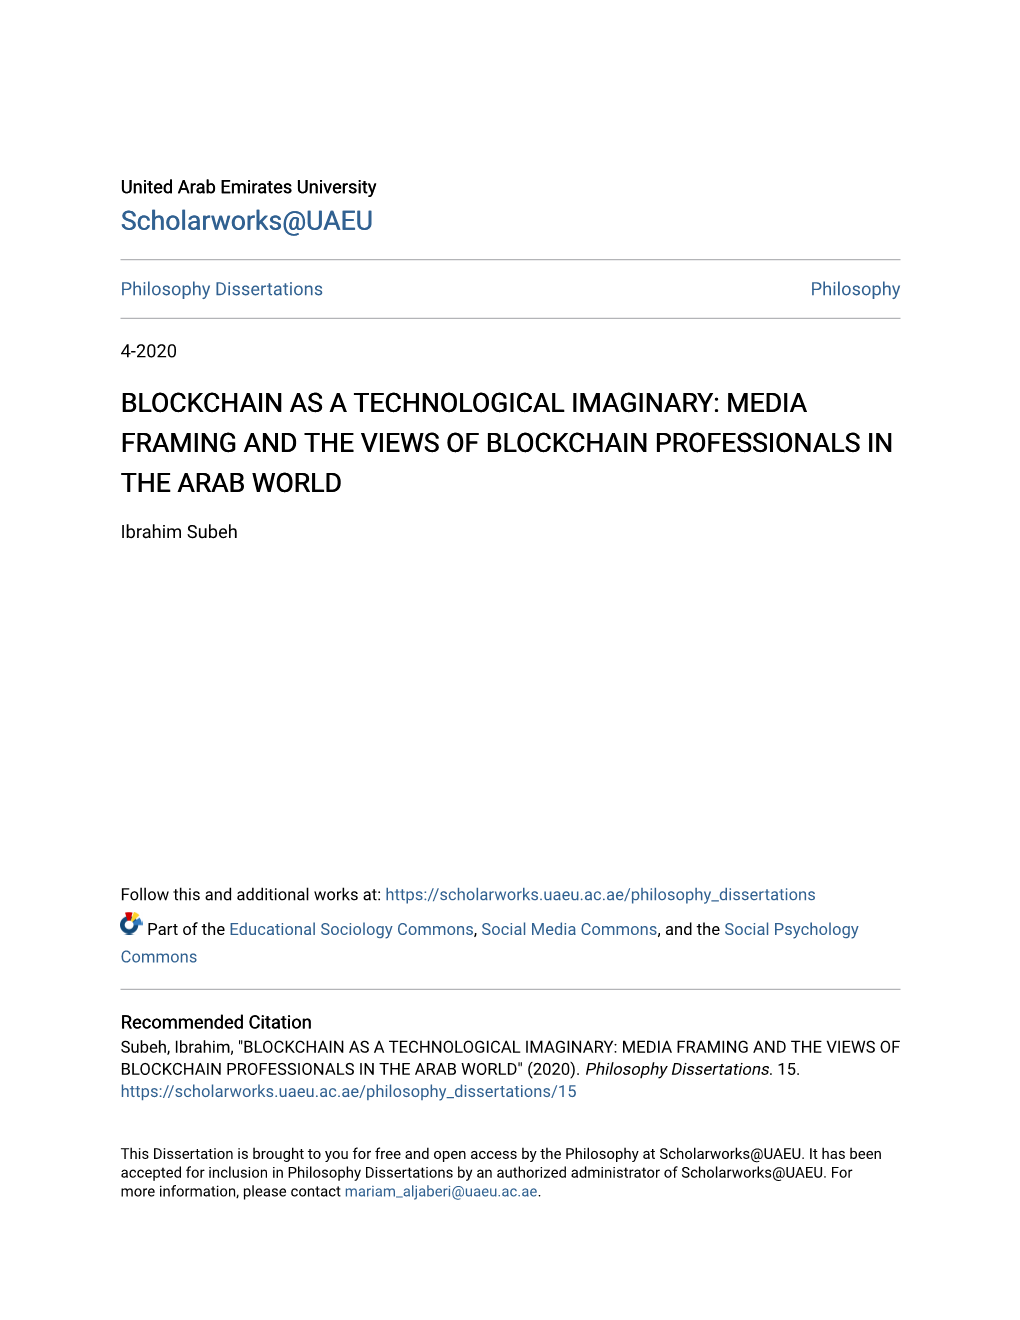 Blockchain As a Technological Imaginary: Media Framing and the Views of Blockchain Professionals in the Arab World